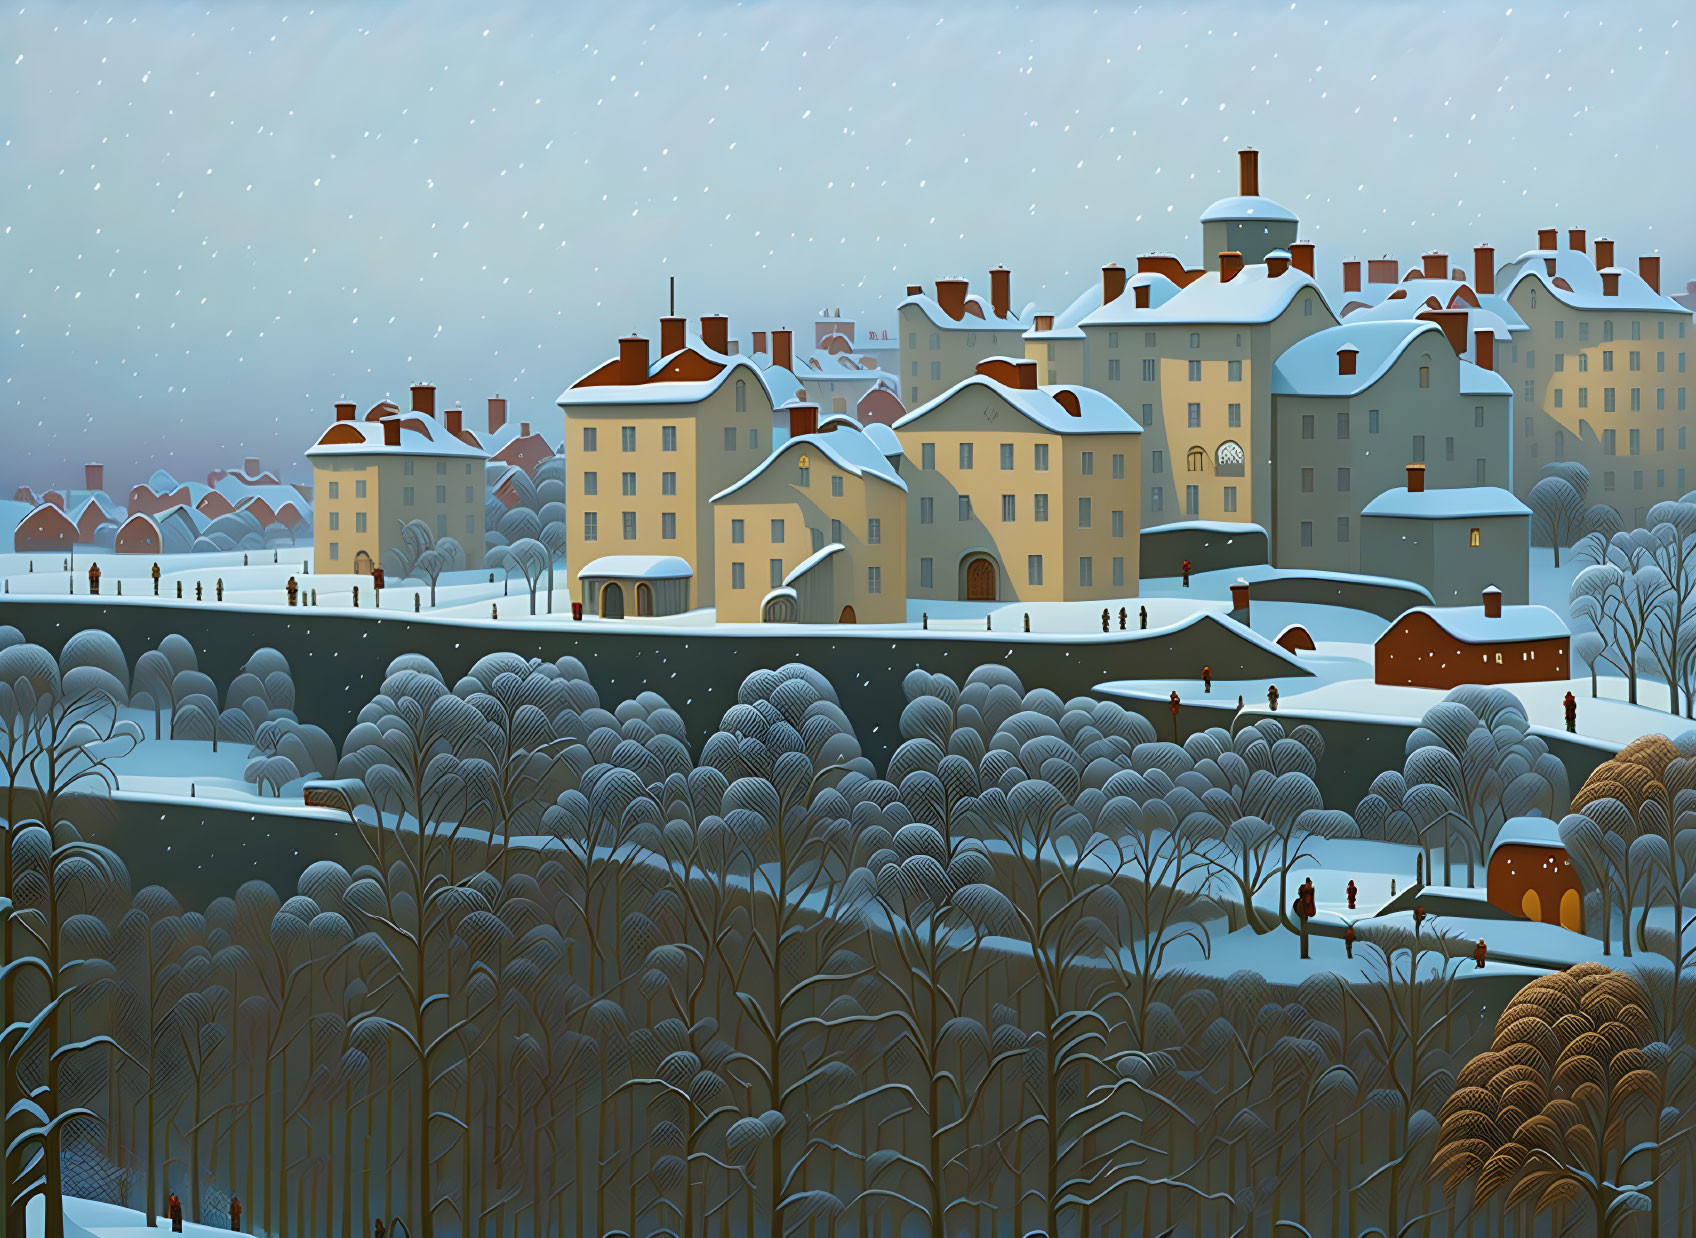 Snowy town scene with buildings, bare trees, and people in winter setting